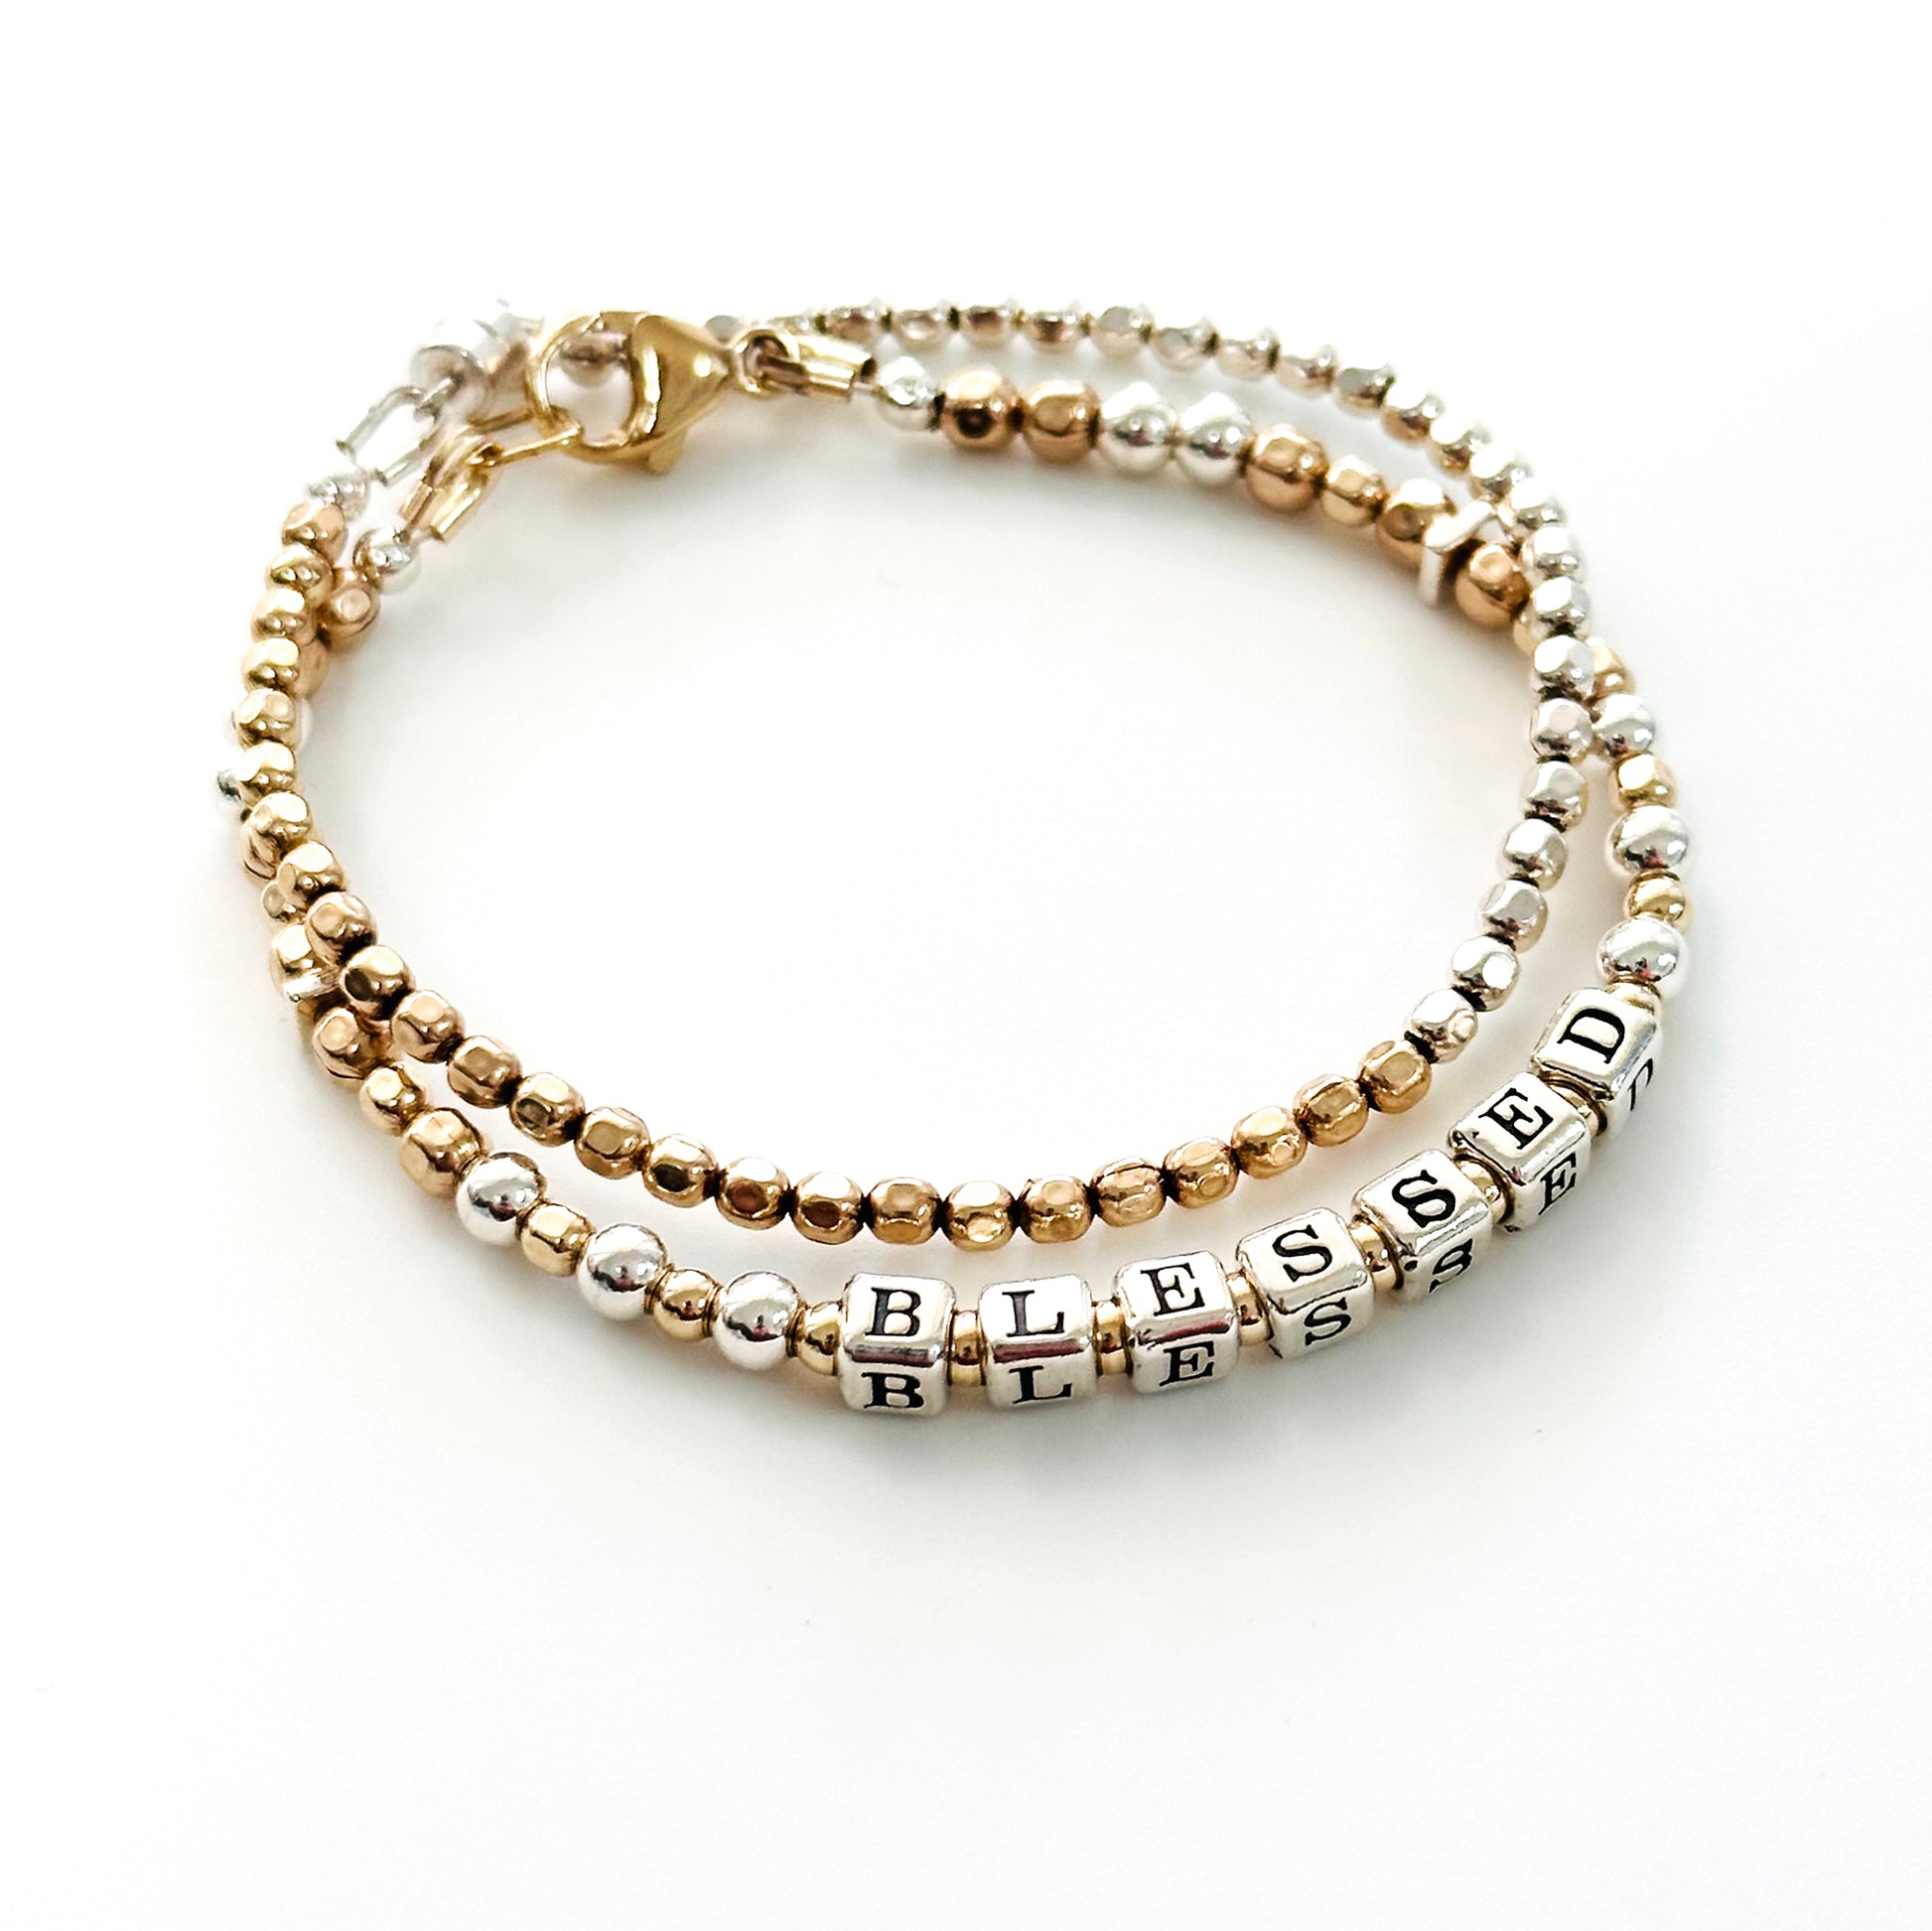 Blessed Engraved Gift Bracelet in gold and silver by Higher Calling Bracelets, shown with mixed metal stacking bracelet